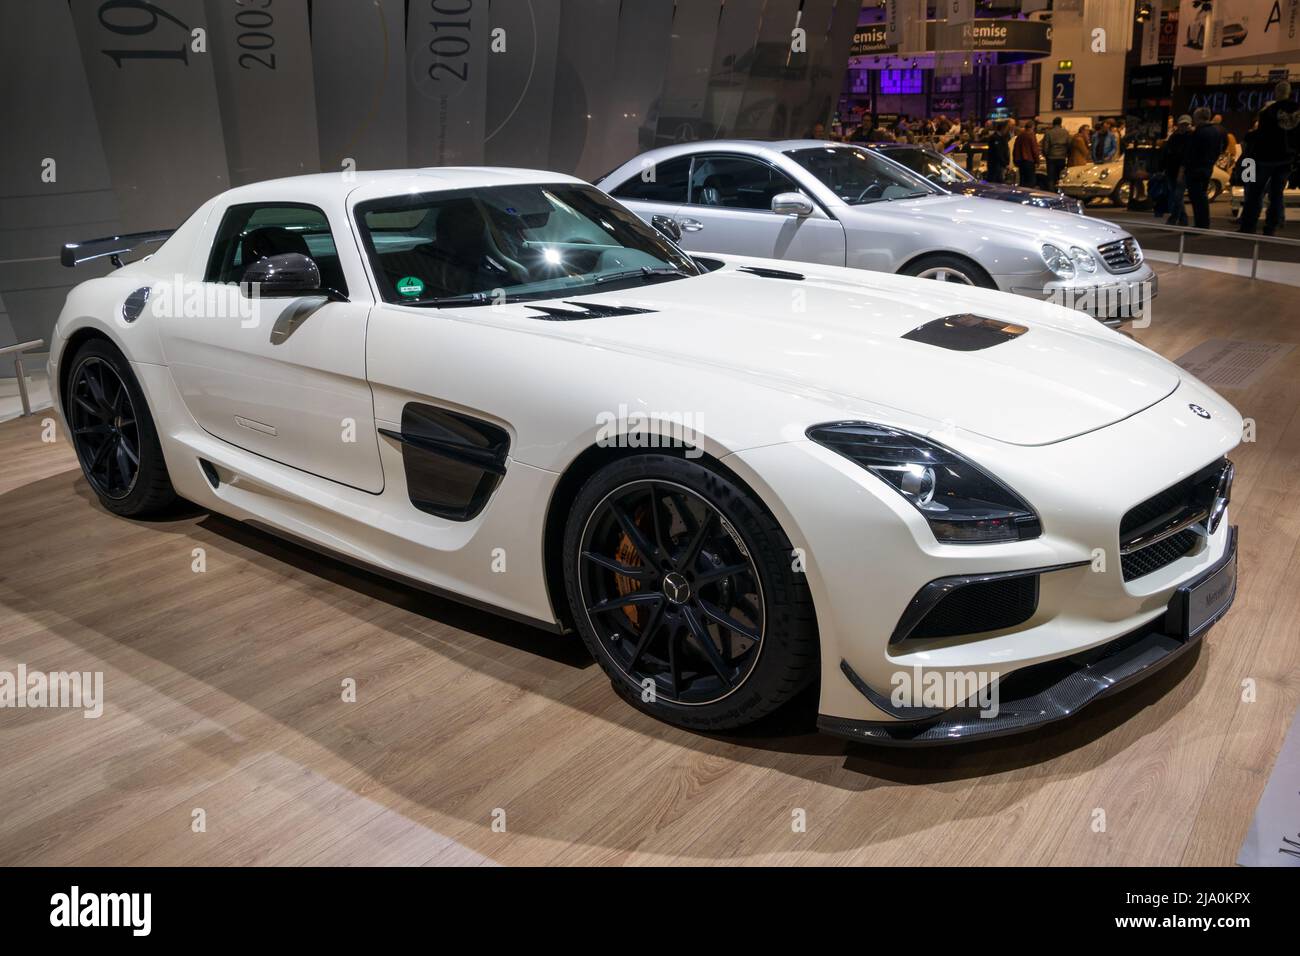 2013 Mercedes Benz SLS AMG Coupe Black Series (C197) sports car on display at the Techno Classica Essen Car Show. Germany - April 6, 2017 Stock Photo